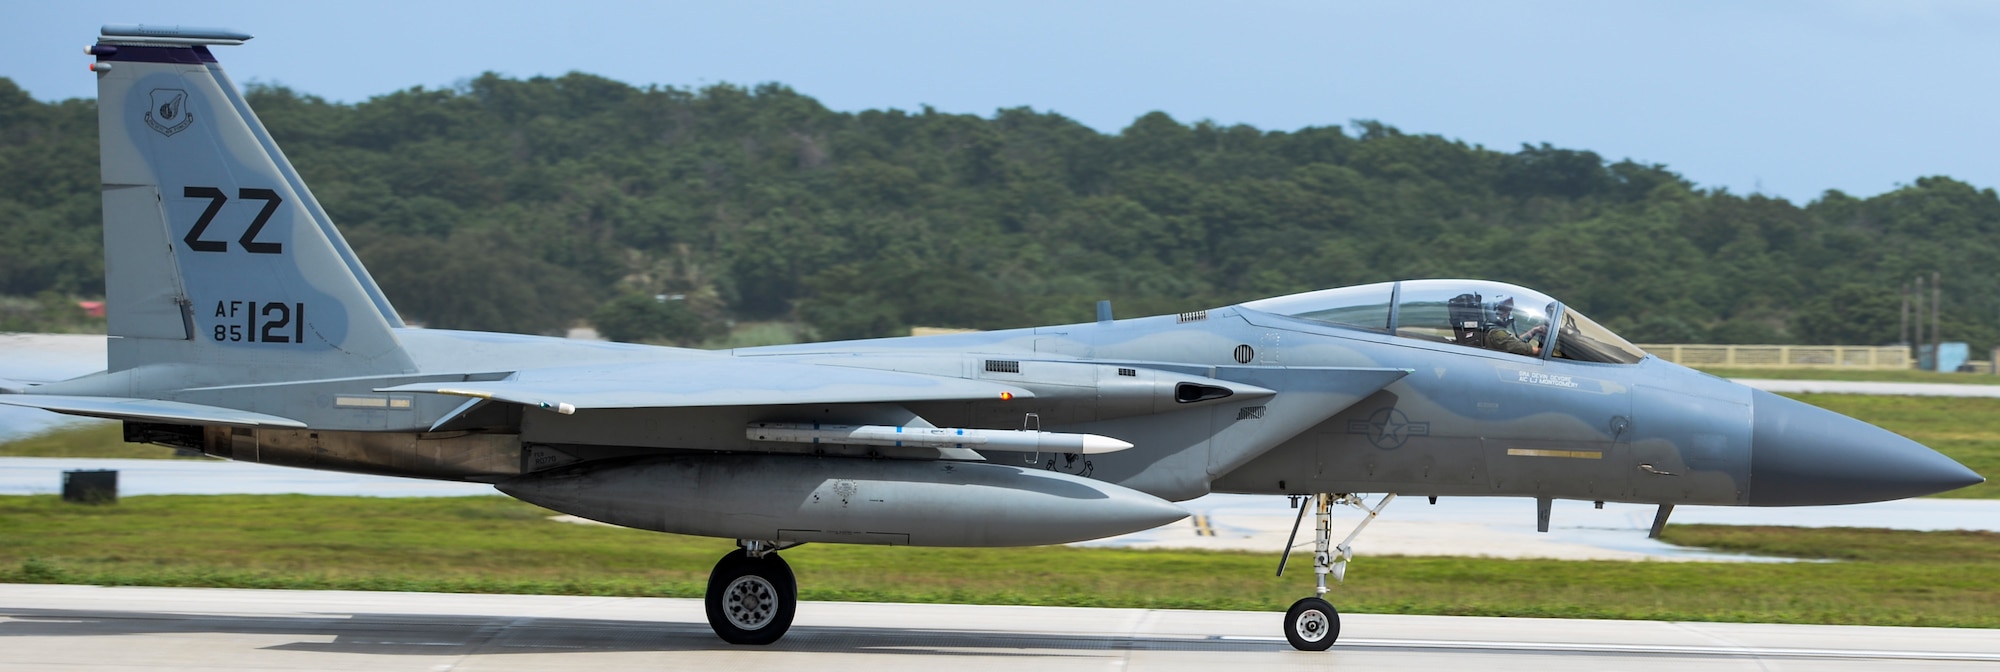 A U.S. Air Force F-15 Eagle assigned to the 44th Fighter Squadron, Kadena Air Base, Japan, taxis during Exercise Valiant Shield at Andersen AFB, Guam, Sept. 14, 2016. Valiant Shield is a biennial U.S. Air Force, Navy and Marine Corps exercise held in Guam, focusing on real-world proficiency in sustaining joint forces at sea, in the air, on land and in cyberspace. (U.S. Air Force photo by Tech. Sgt. Richard P. Ebensberger)